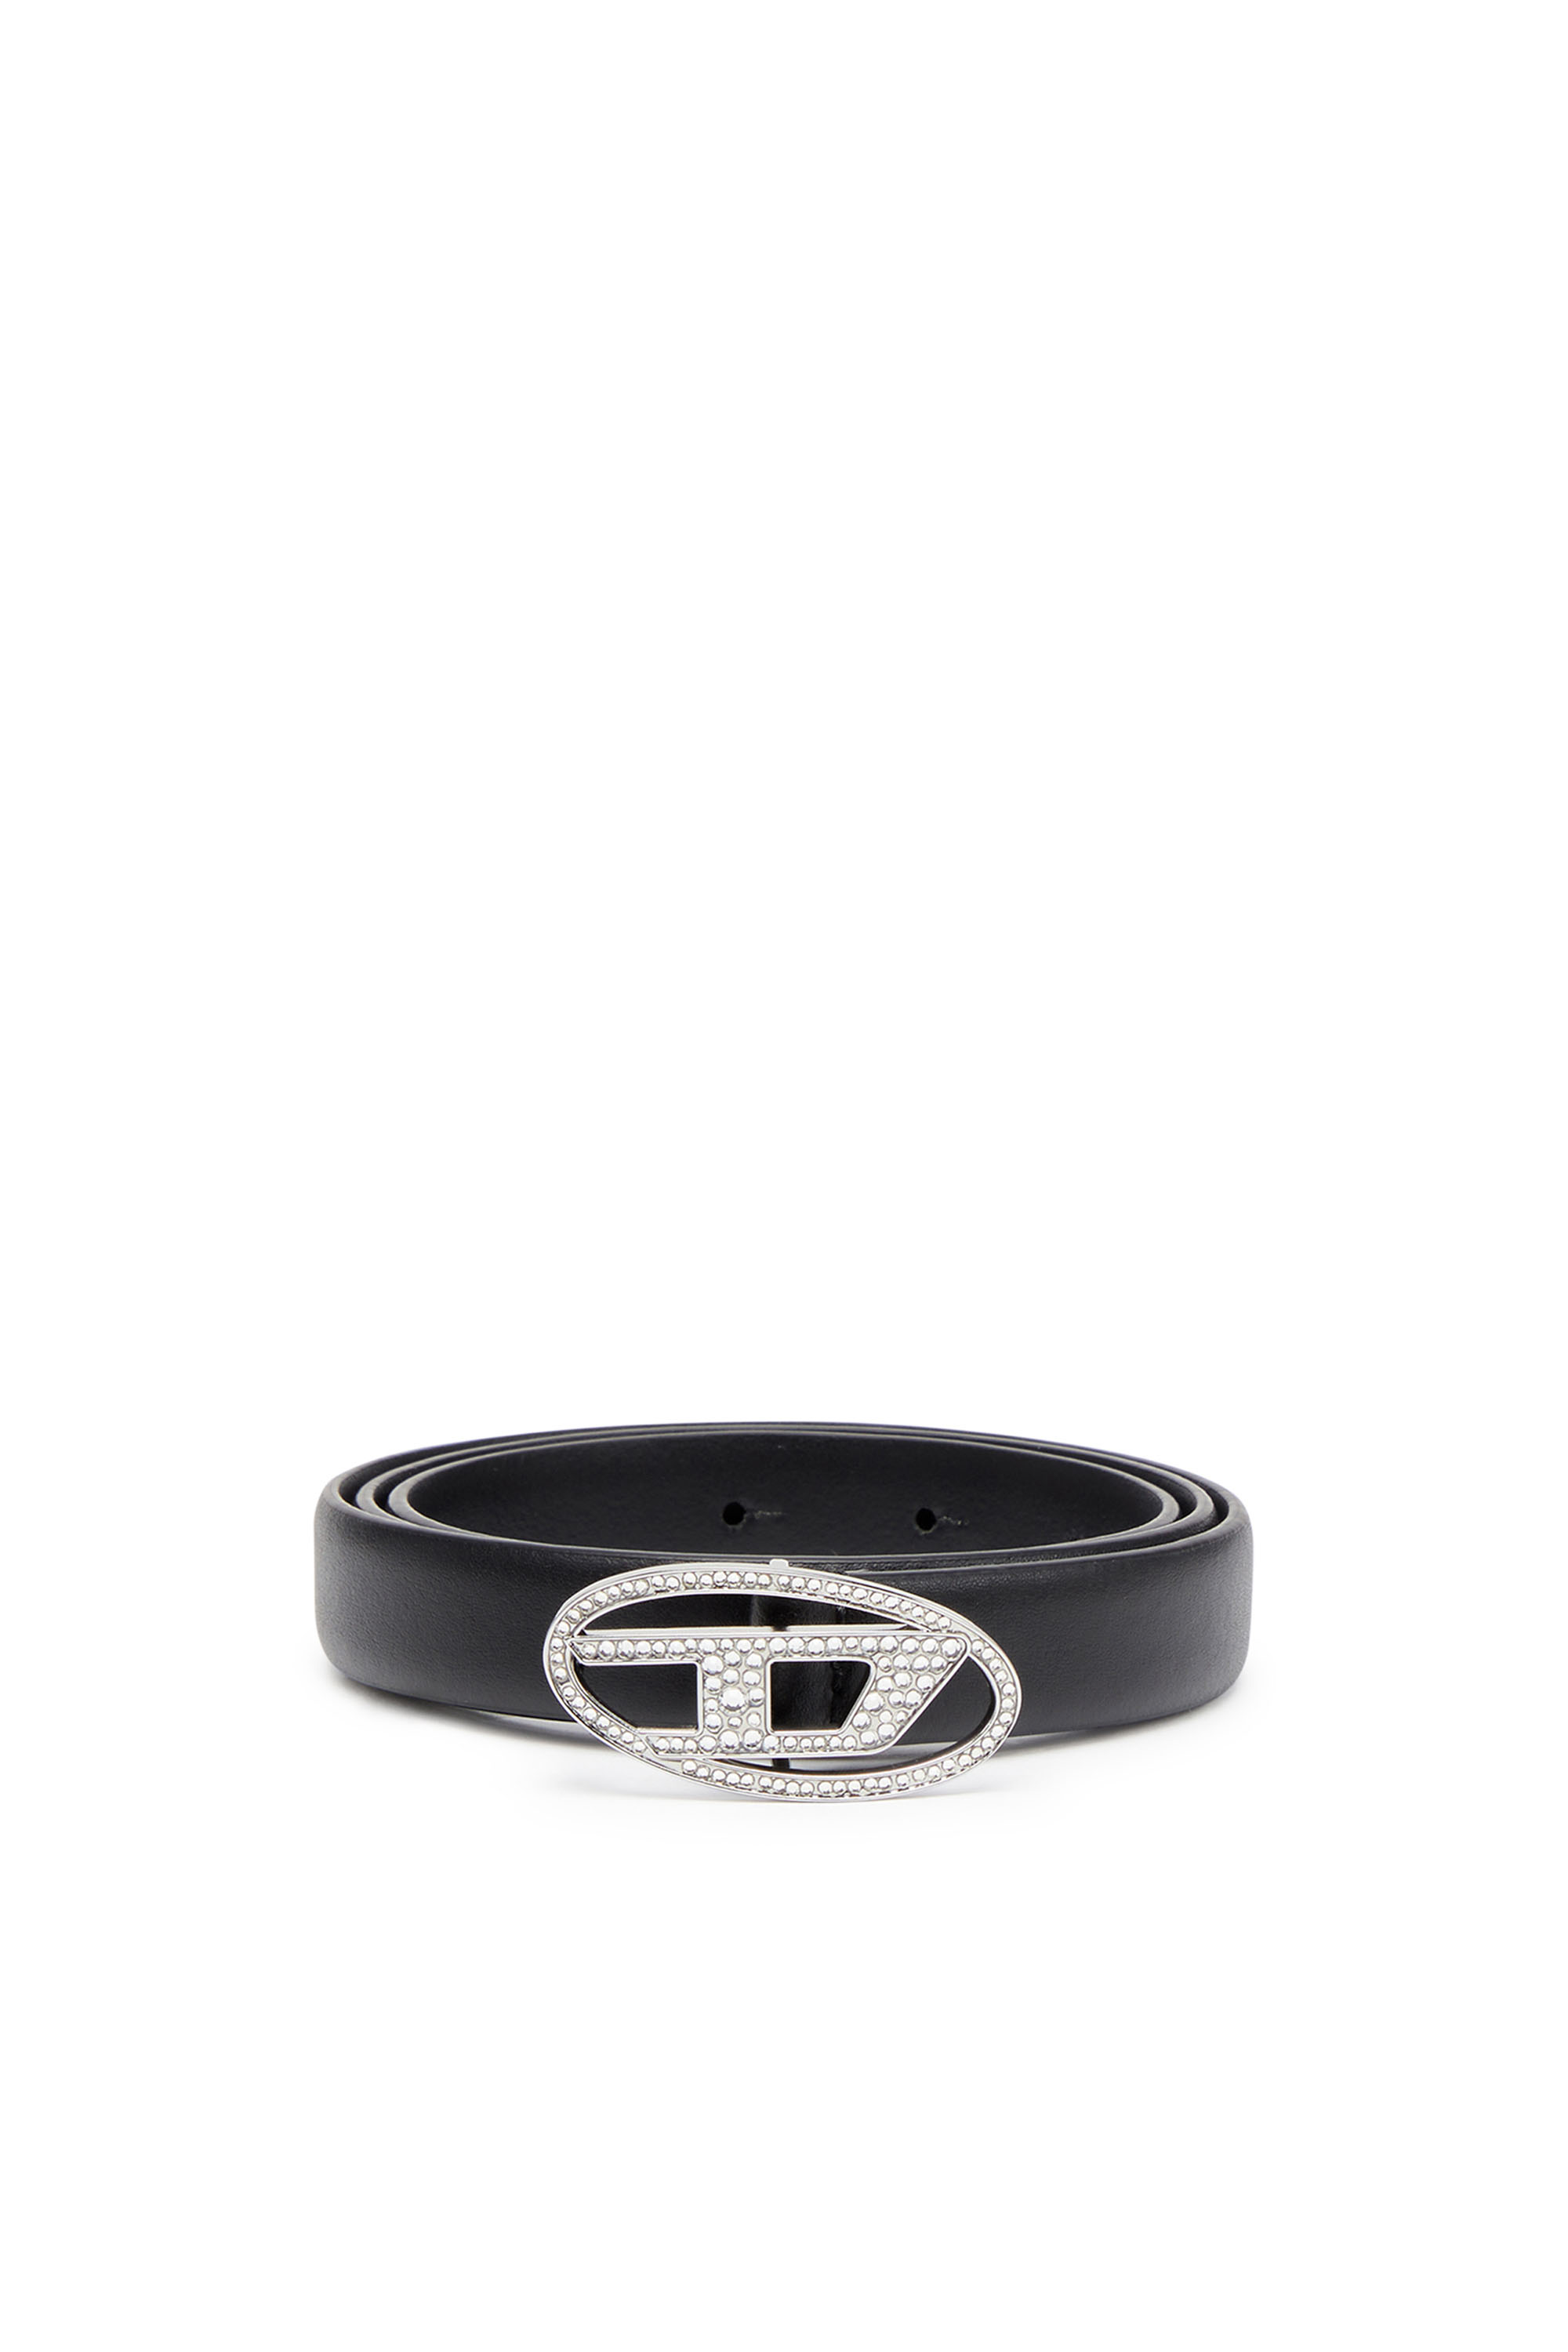 B-1DR STRASS 20 Slim leather belt with crystal buckle｜ブラック 